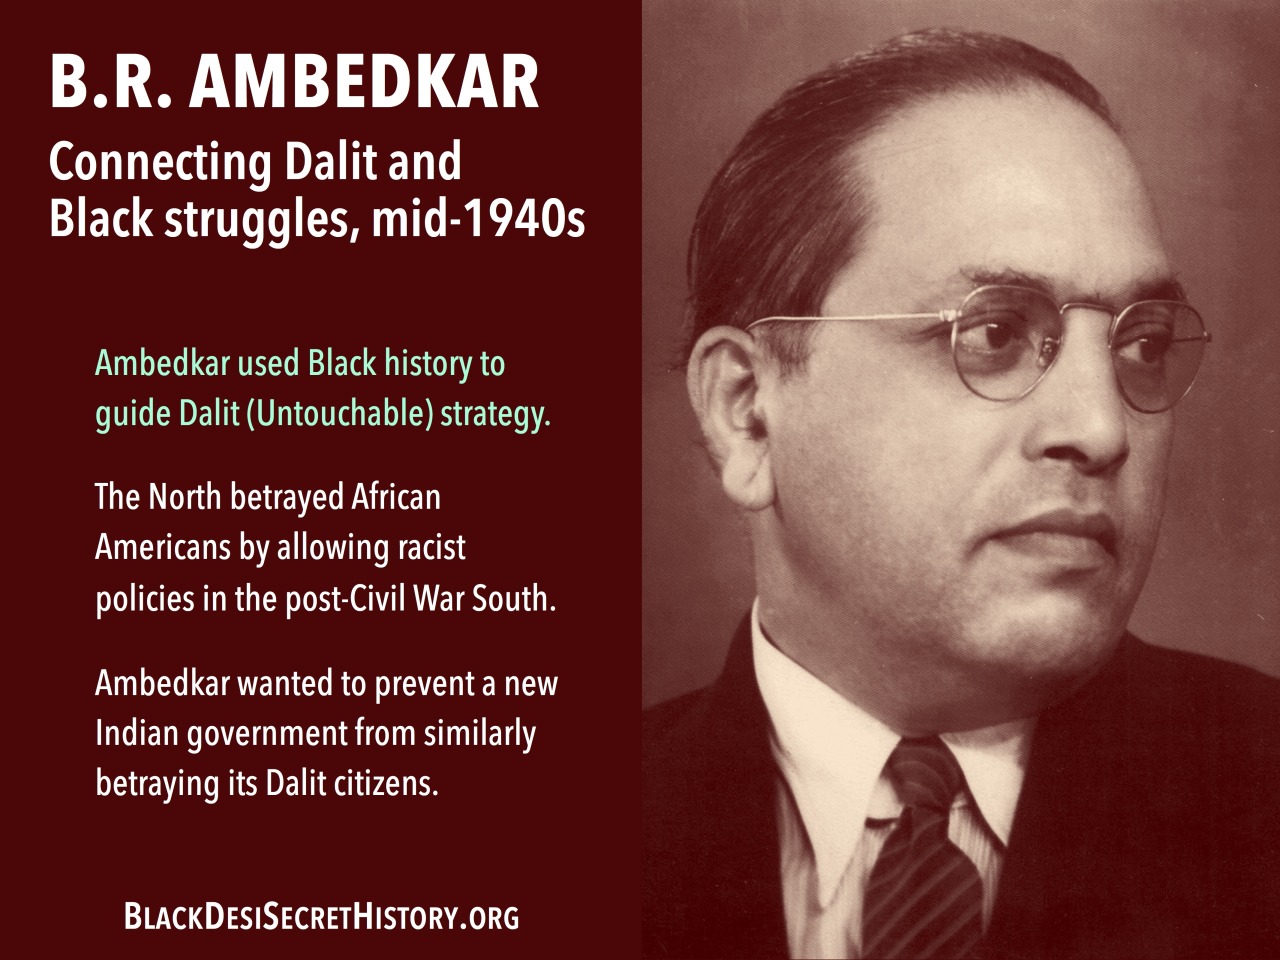 B.R. AMBEDKAR, Connecting Dalit and Black struggles, mid-1940s: Ambedkar used Black history to guide Dalit (Untouchable) strategy. The North betrayed African Americans by allowing racist policies in the post-Civil War South.  Ambedkar wanted to prevent a new Indian government from similarly betraying its Dalit citizens.